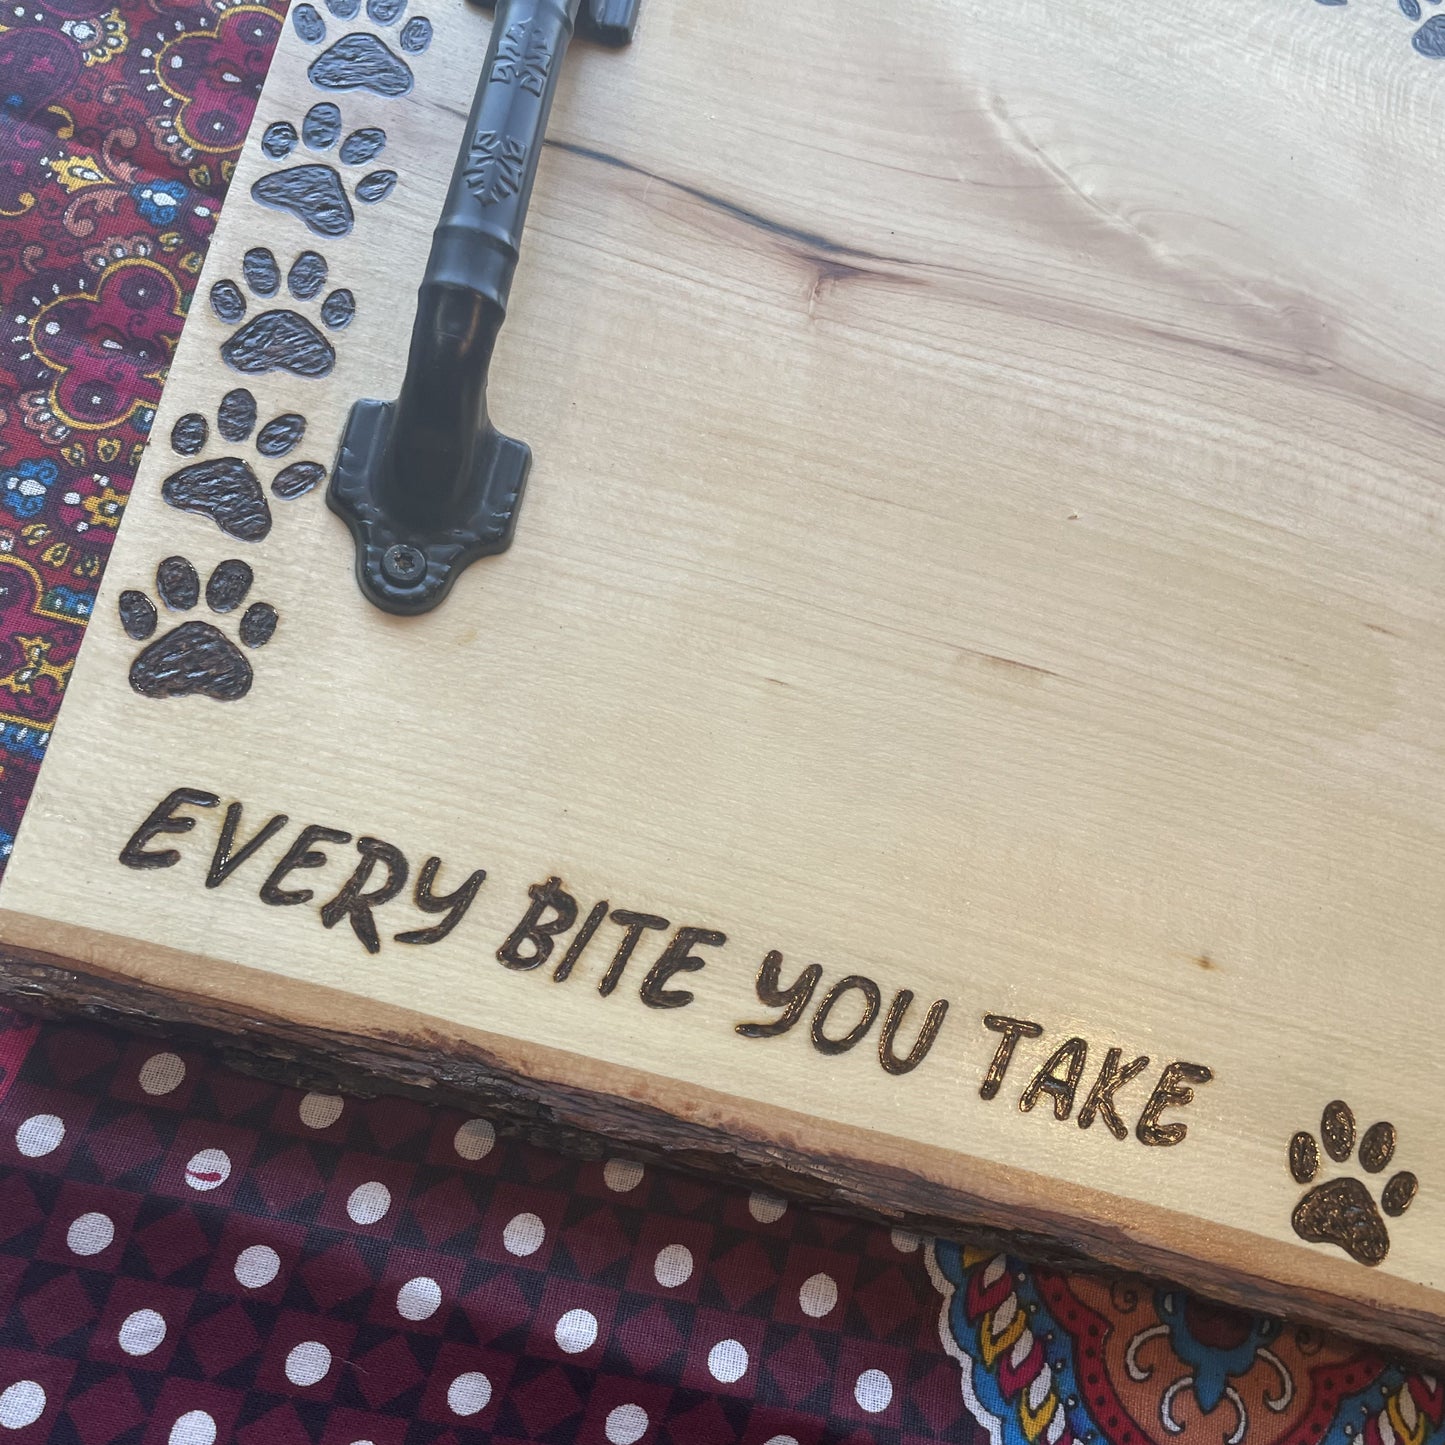 I'll be Watching You Dog Paws Serving Tray Charcuterie Board Wood Burned Handmade